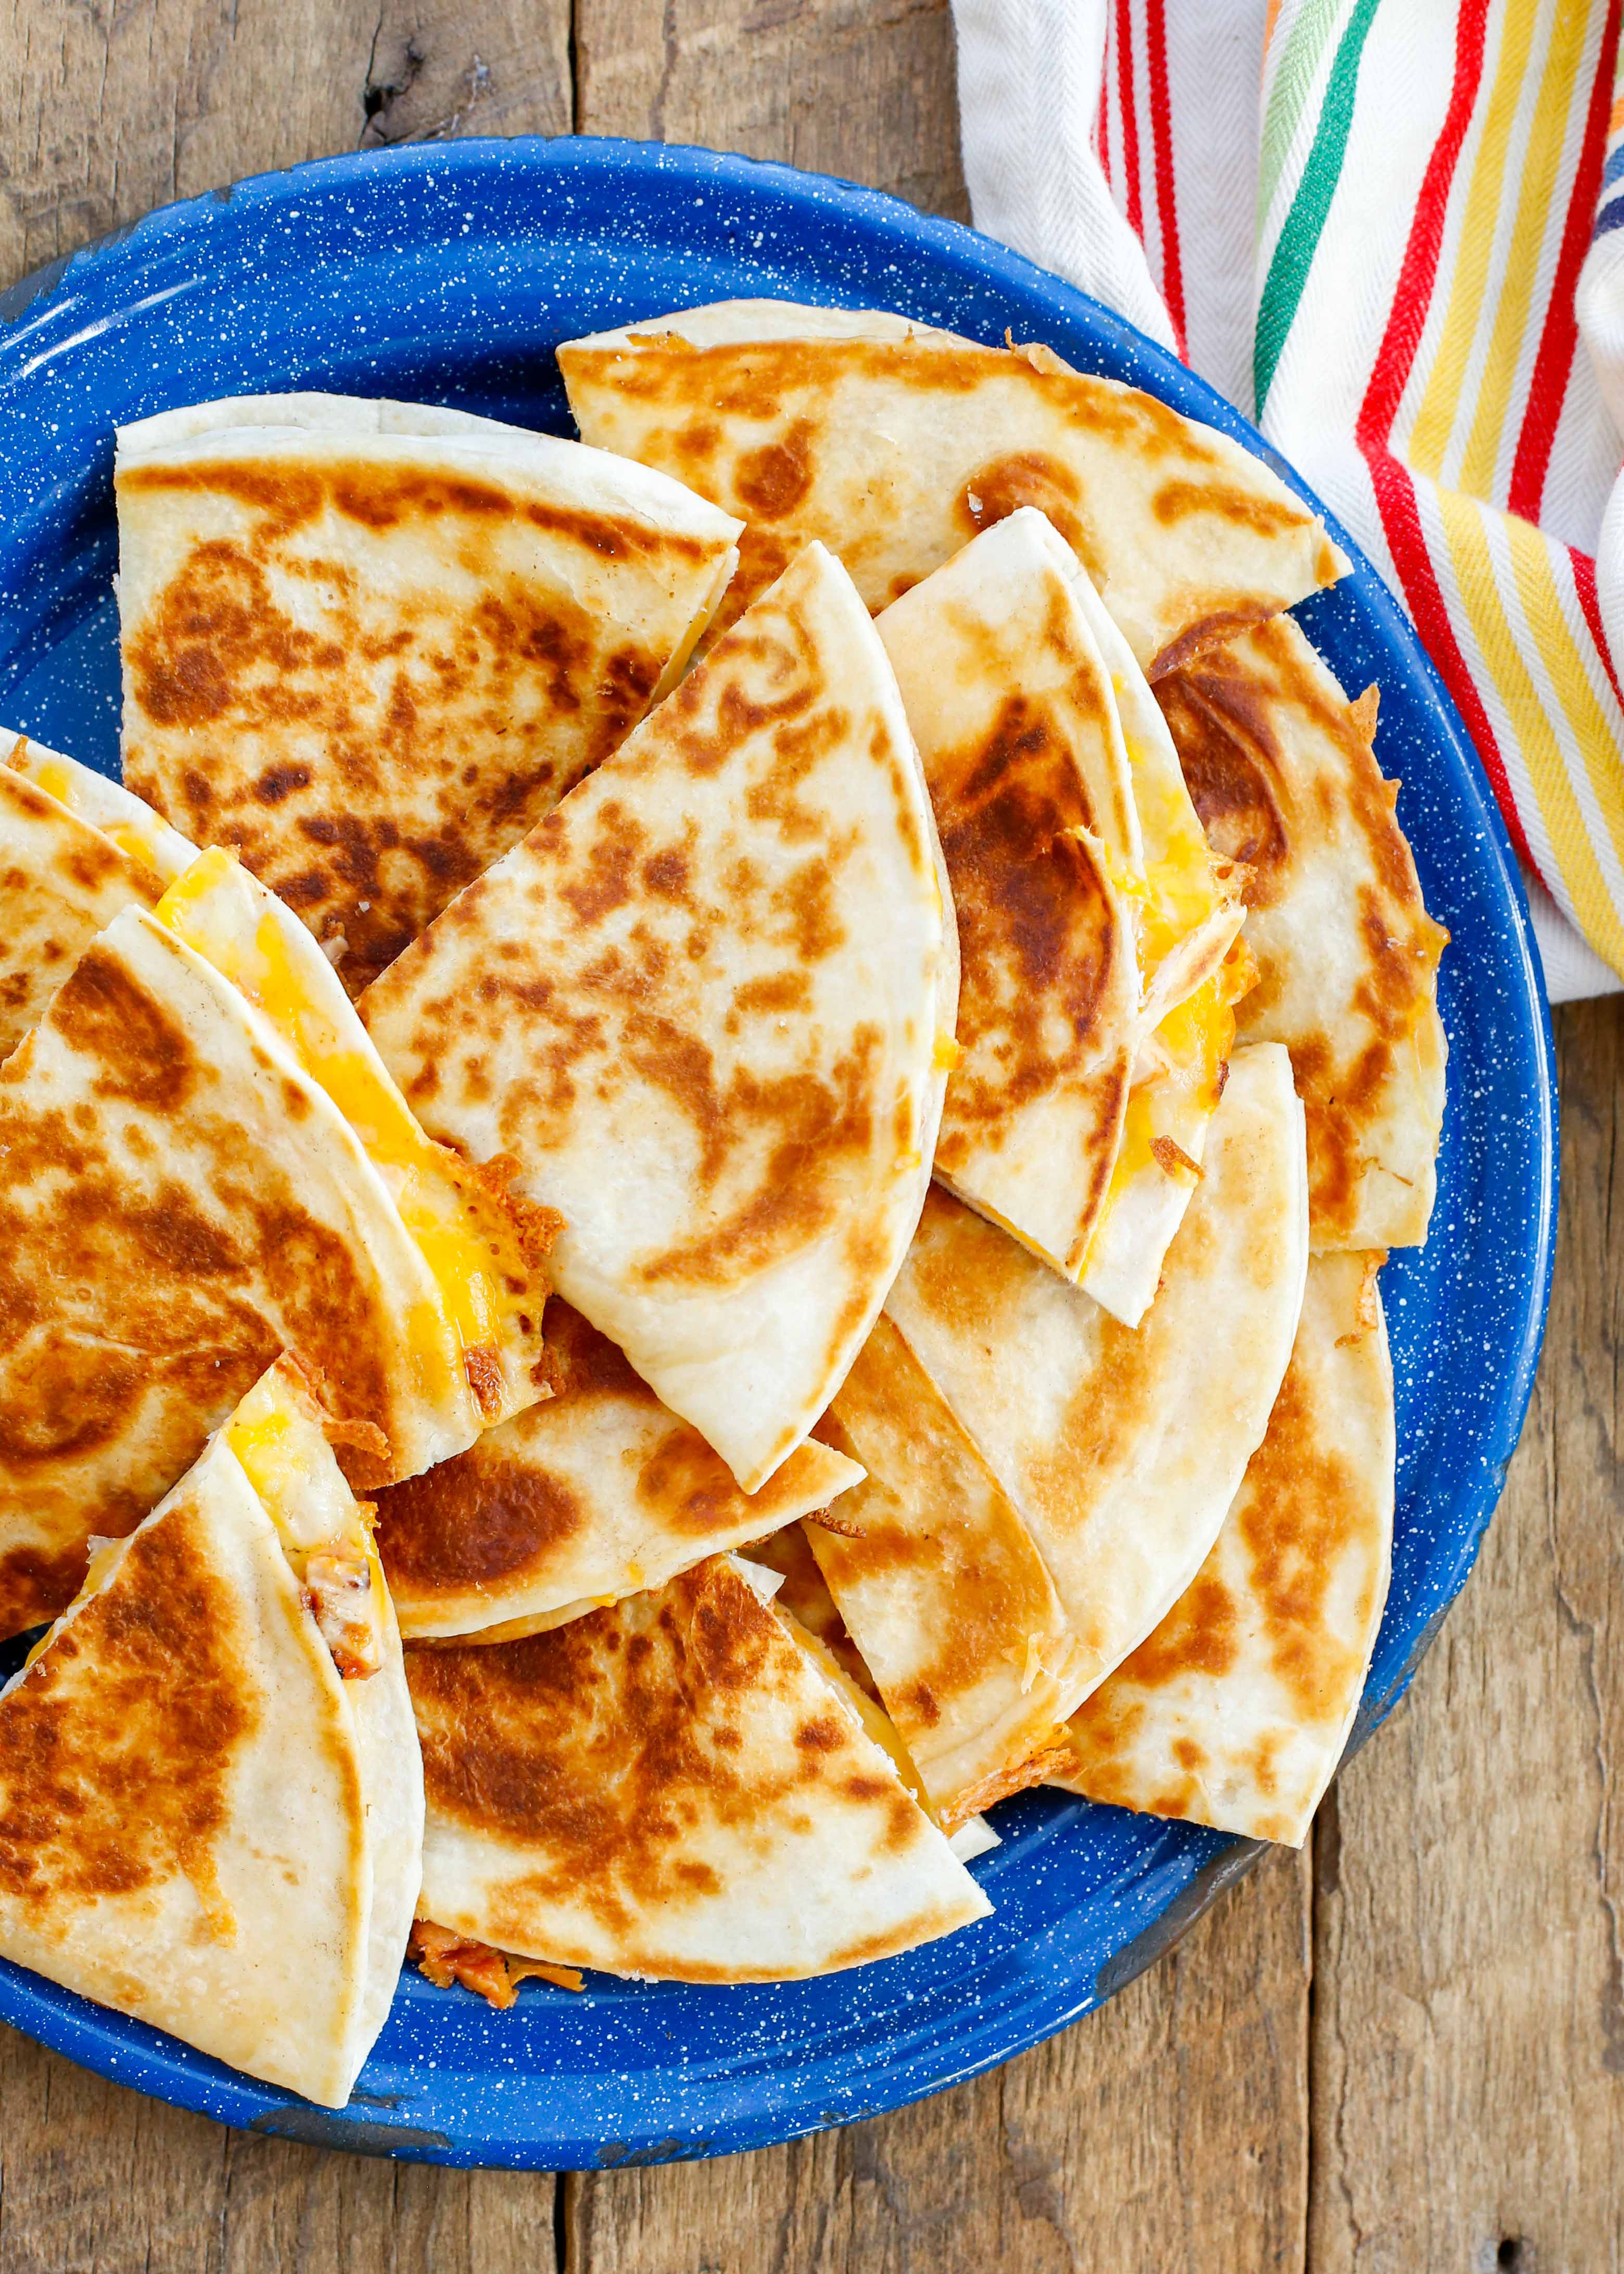 13 Best Quesadilla Makers For Delicious Meals, Reviewed In 2023